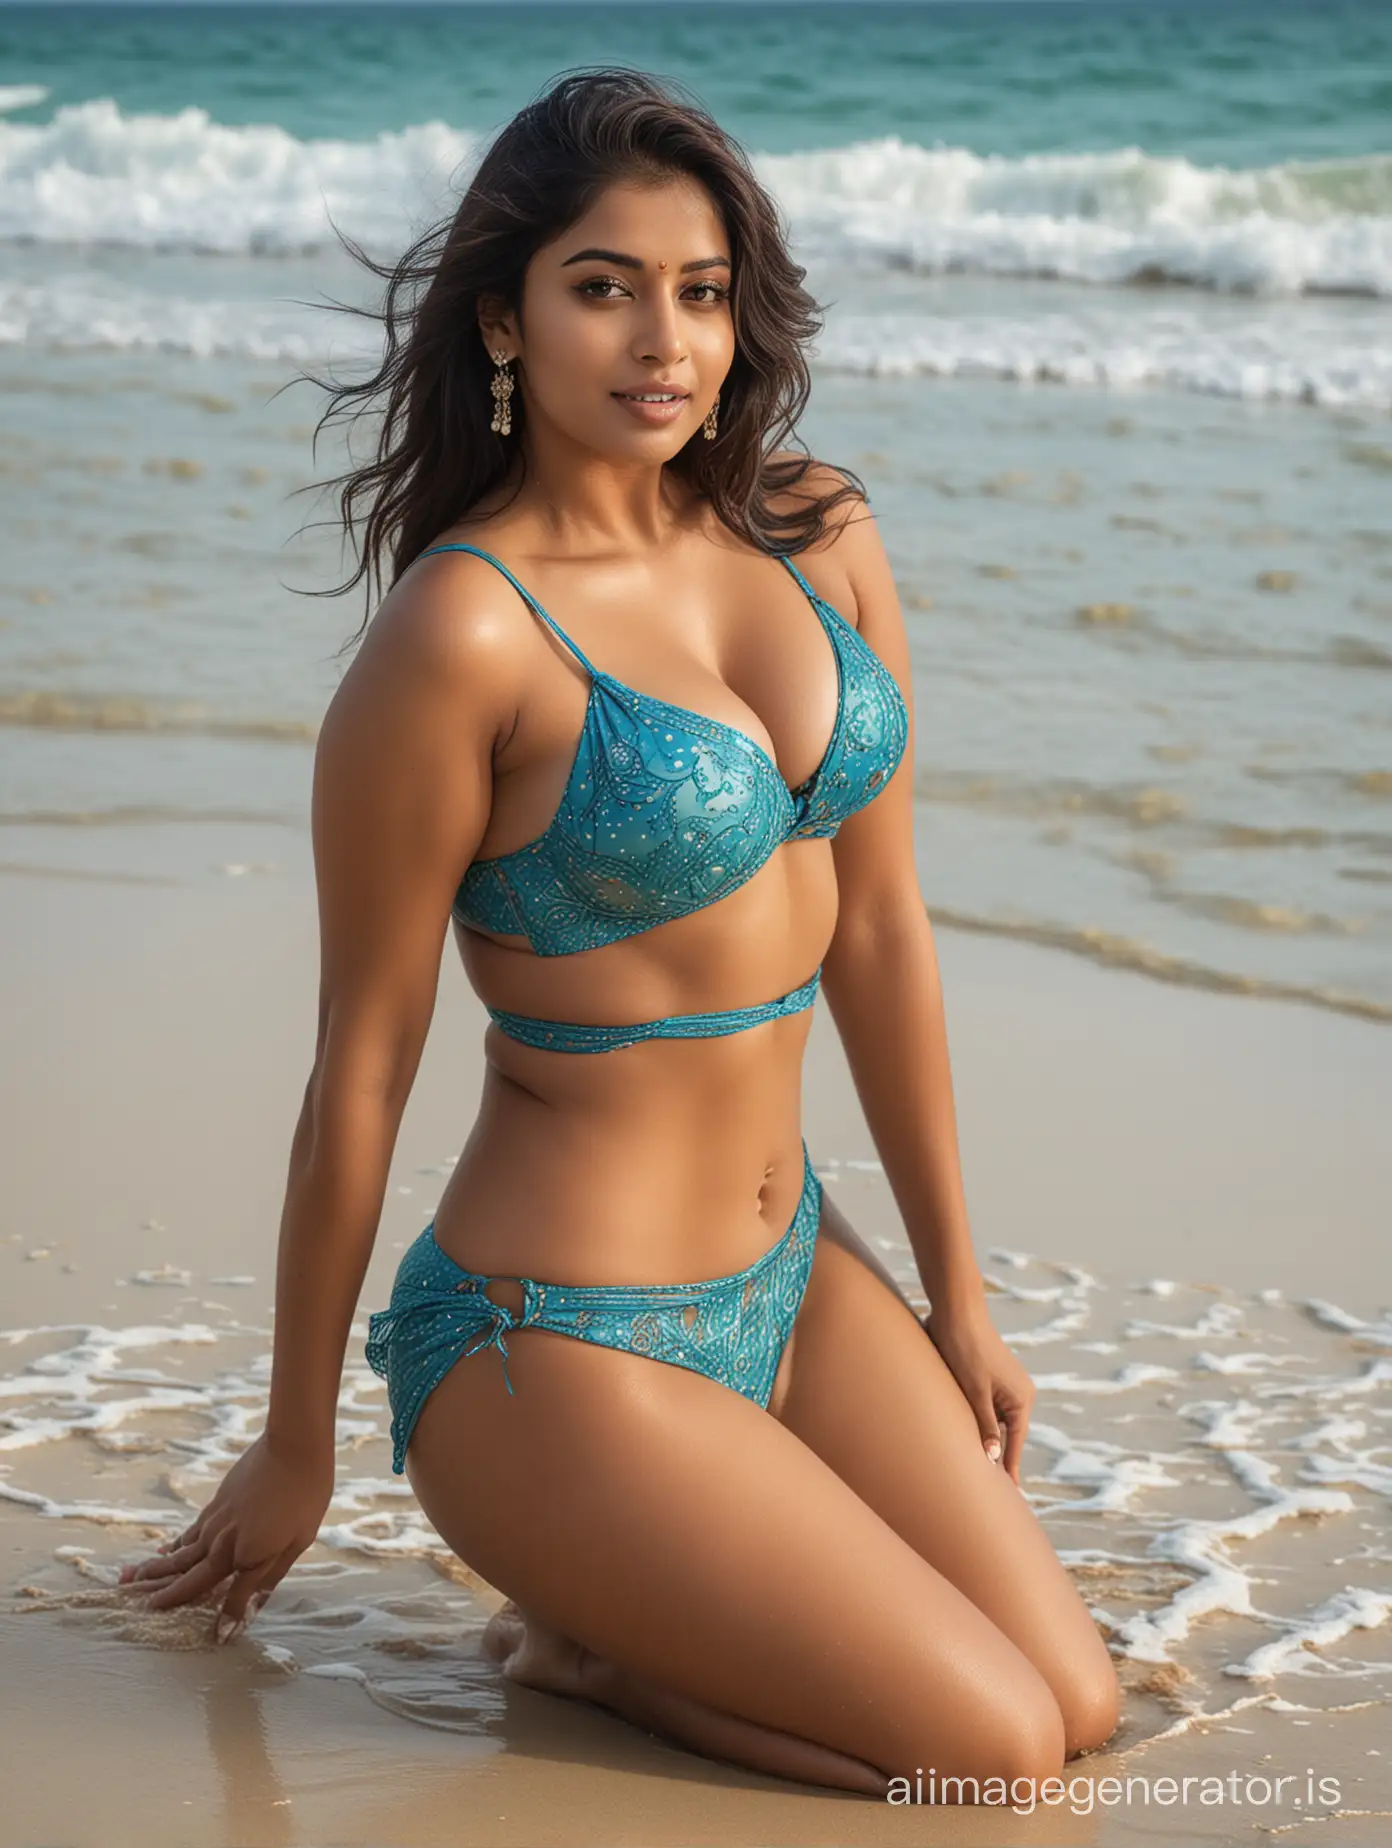 Busty Indian lady with visible curves, setting on sand with sensuous expression, ocean blue water in background, clear legs, close shot